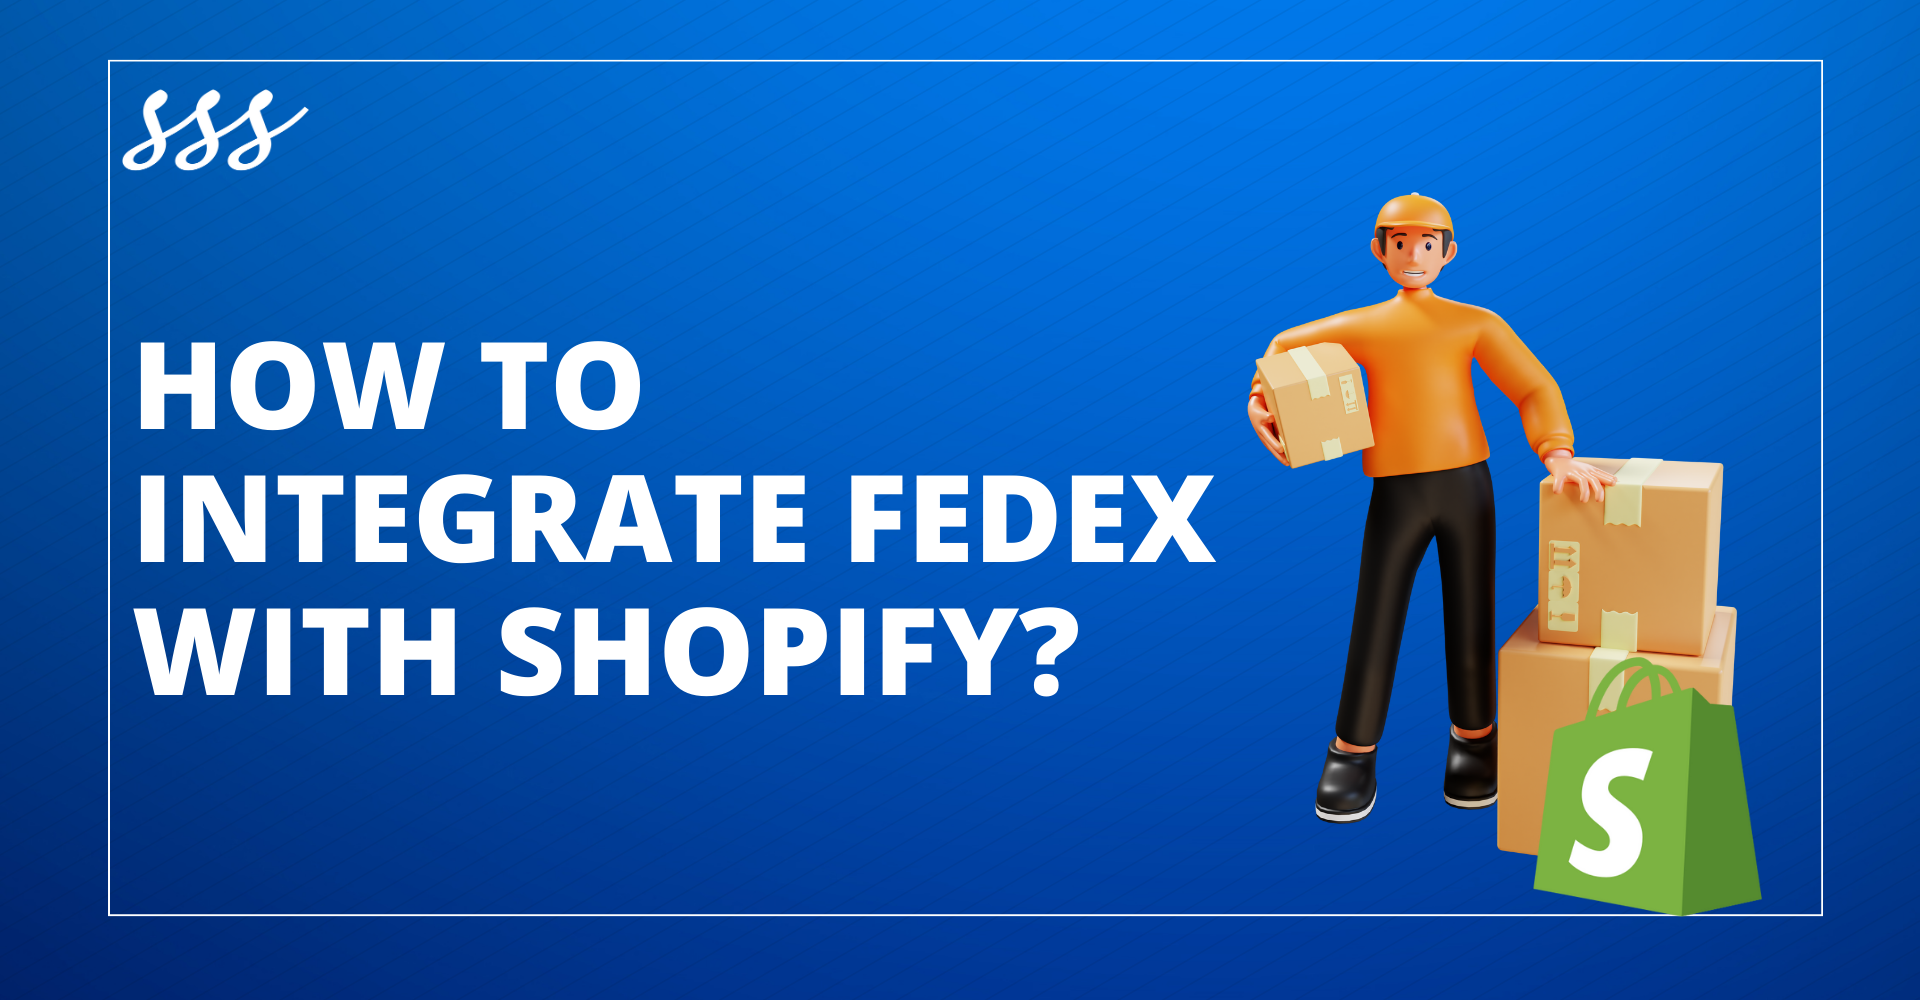 How to Integrate FedEx with Shopify